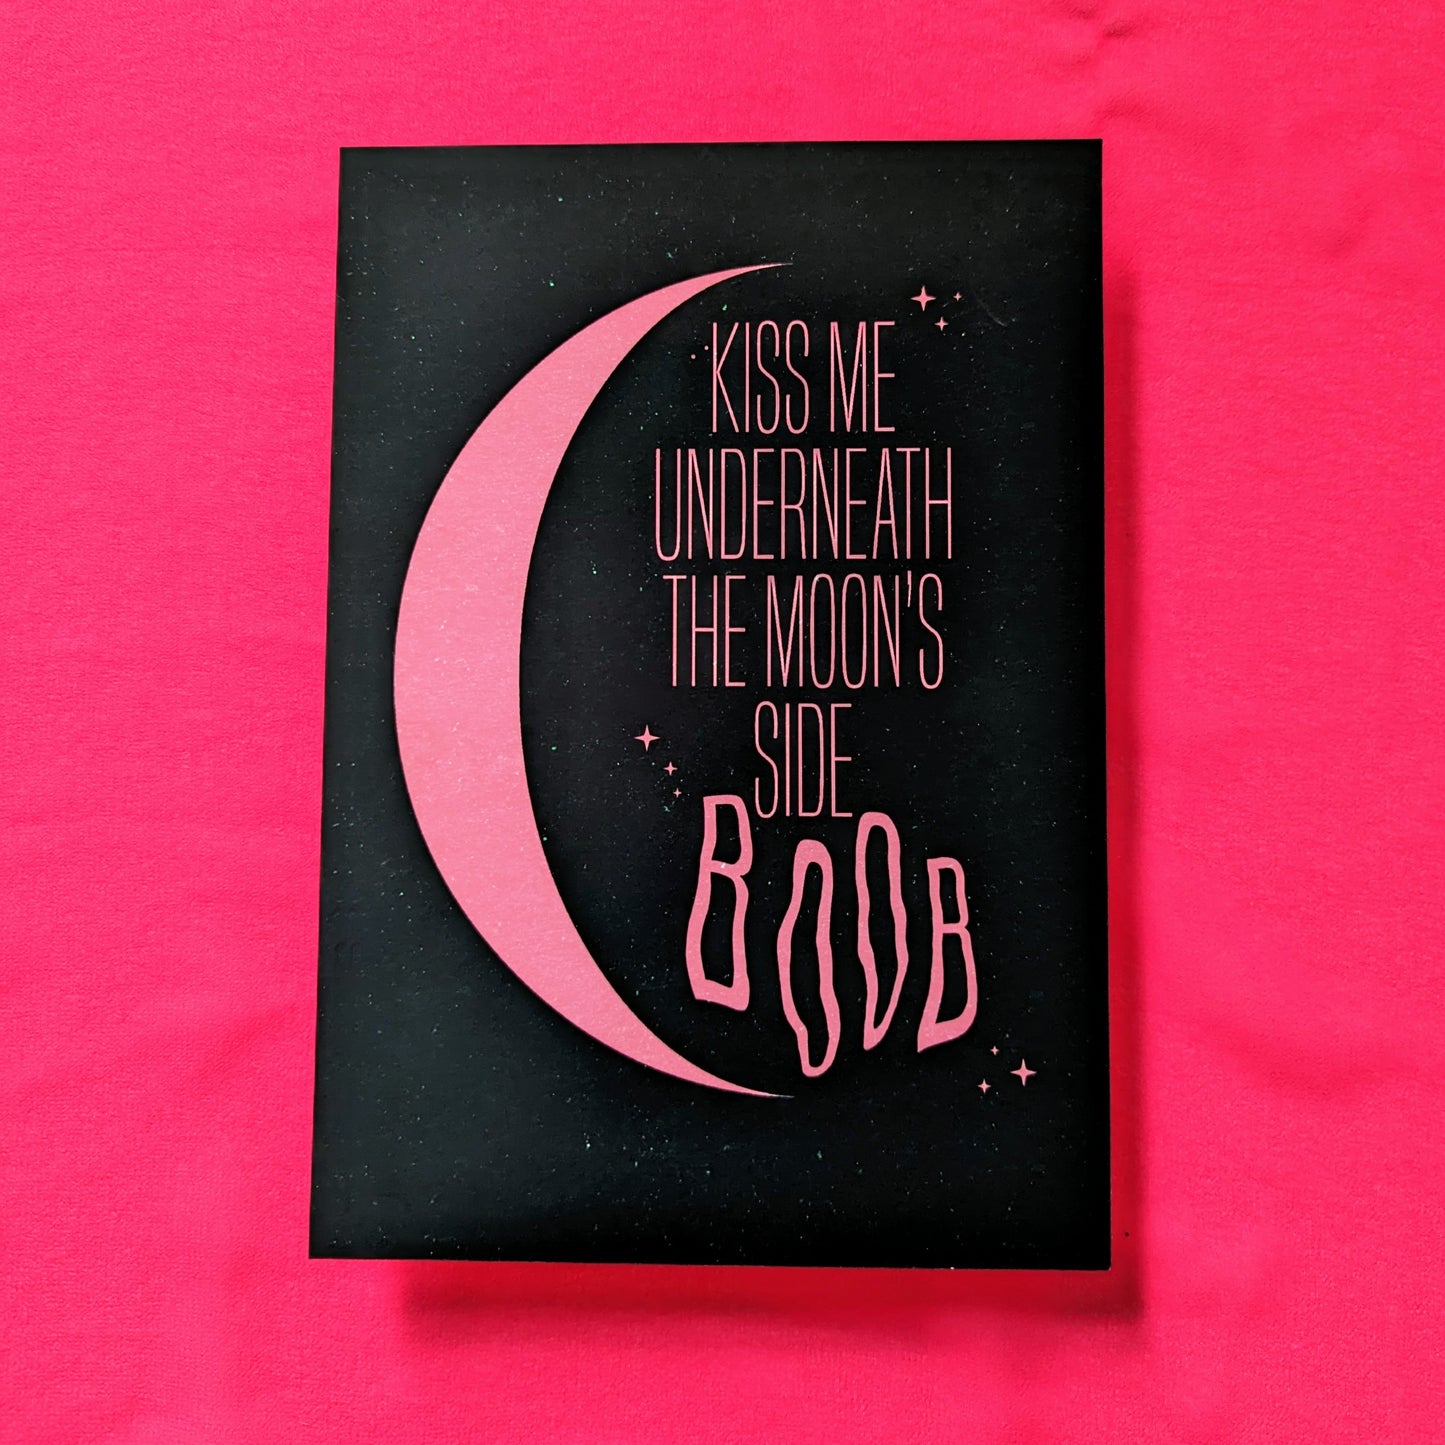 A5 'Kiss Me Under the Moon's Side Boob' Print - The 'Wonky' Sale